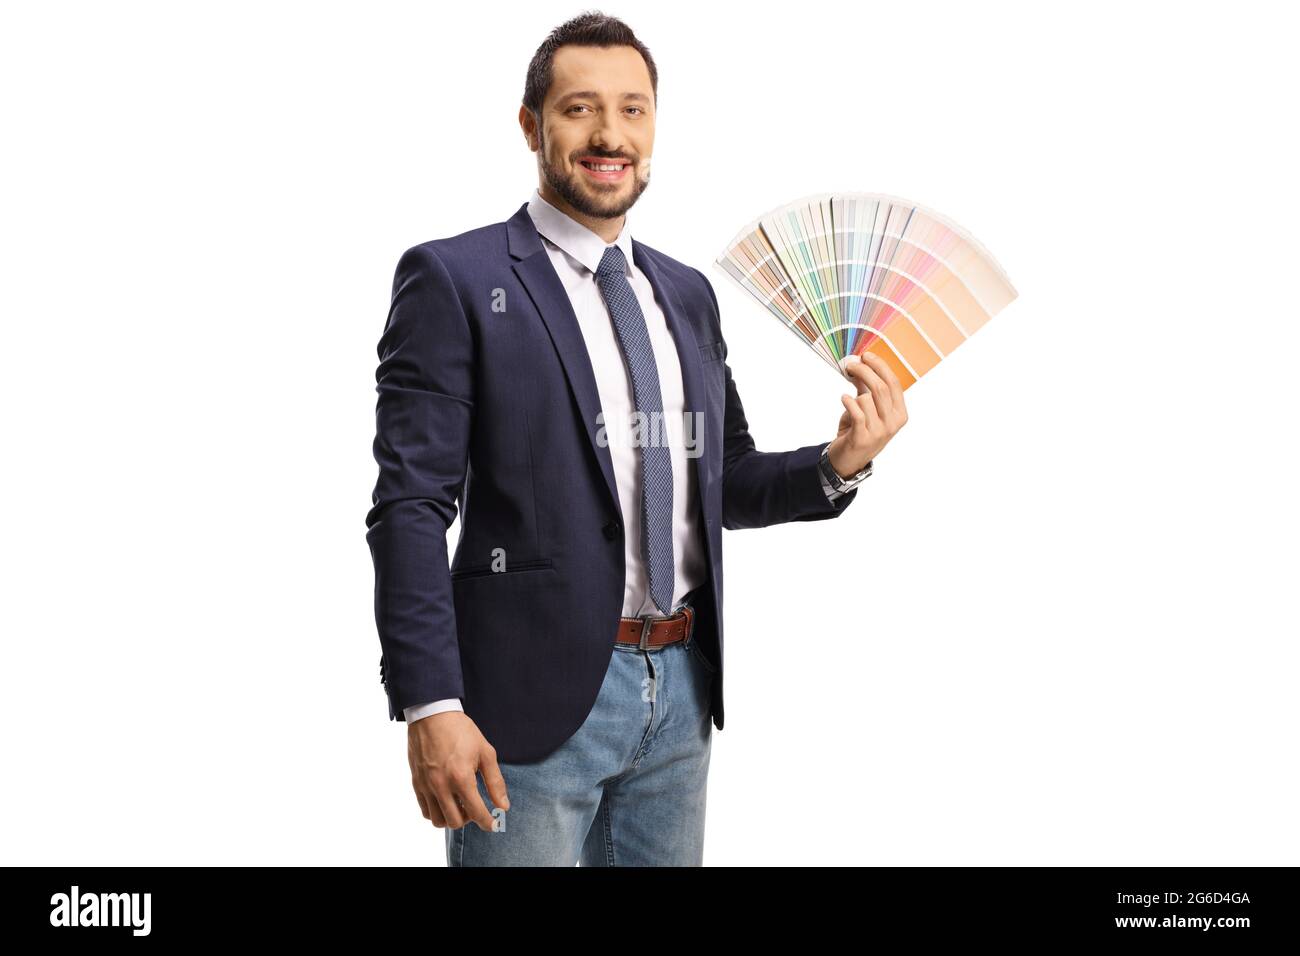 Young man holding a color palette and looking at camera isolated on white background Stock Photo